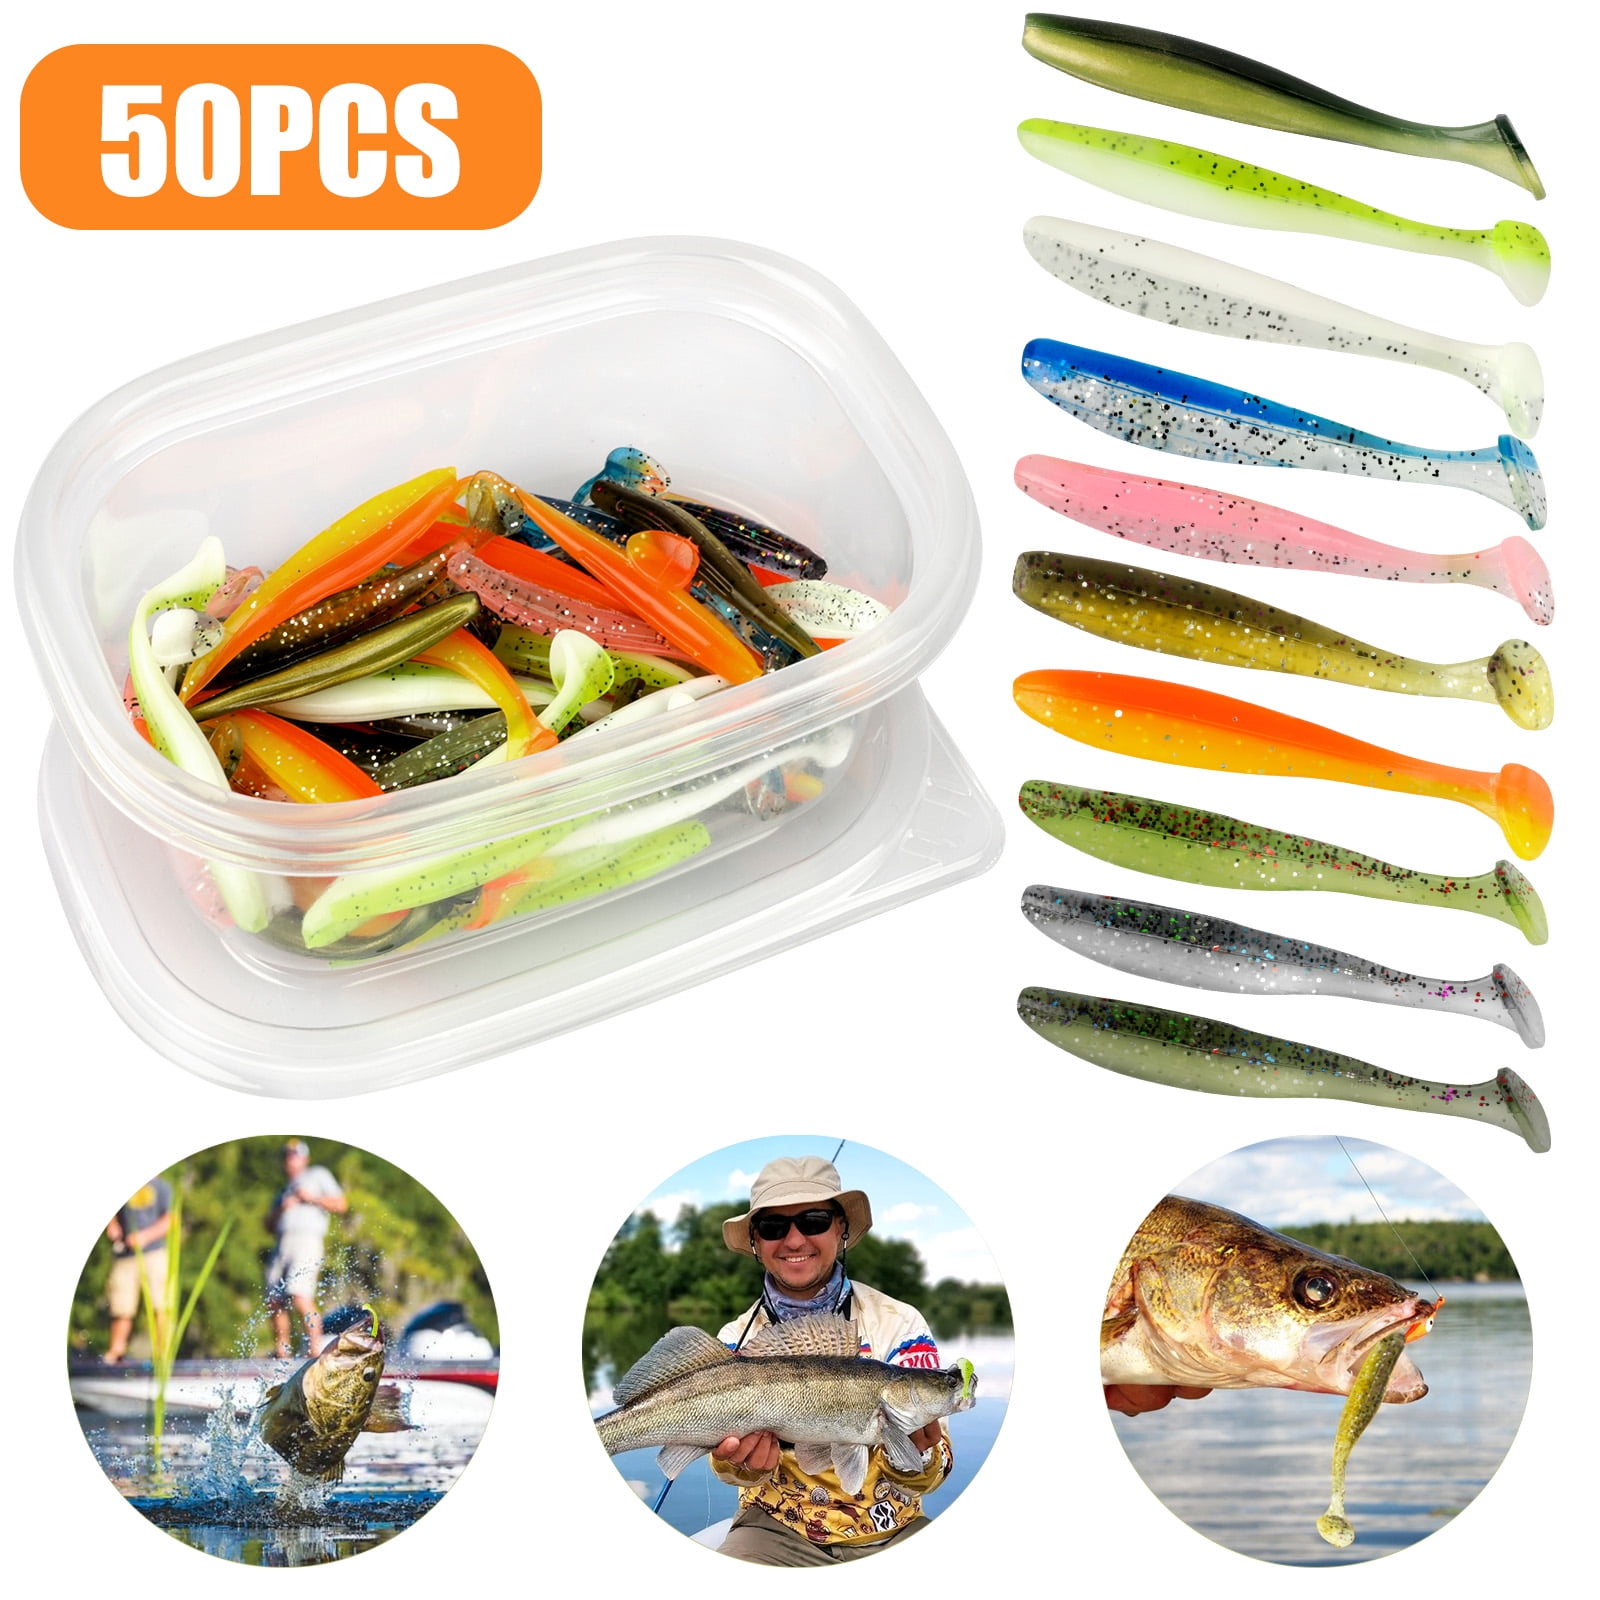 50Pcs Crappie Jigs Lure Set 2 inch Crappie Bait Crappie Jig Heads Hooks Fishing Lures for Crappie 